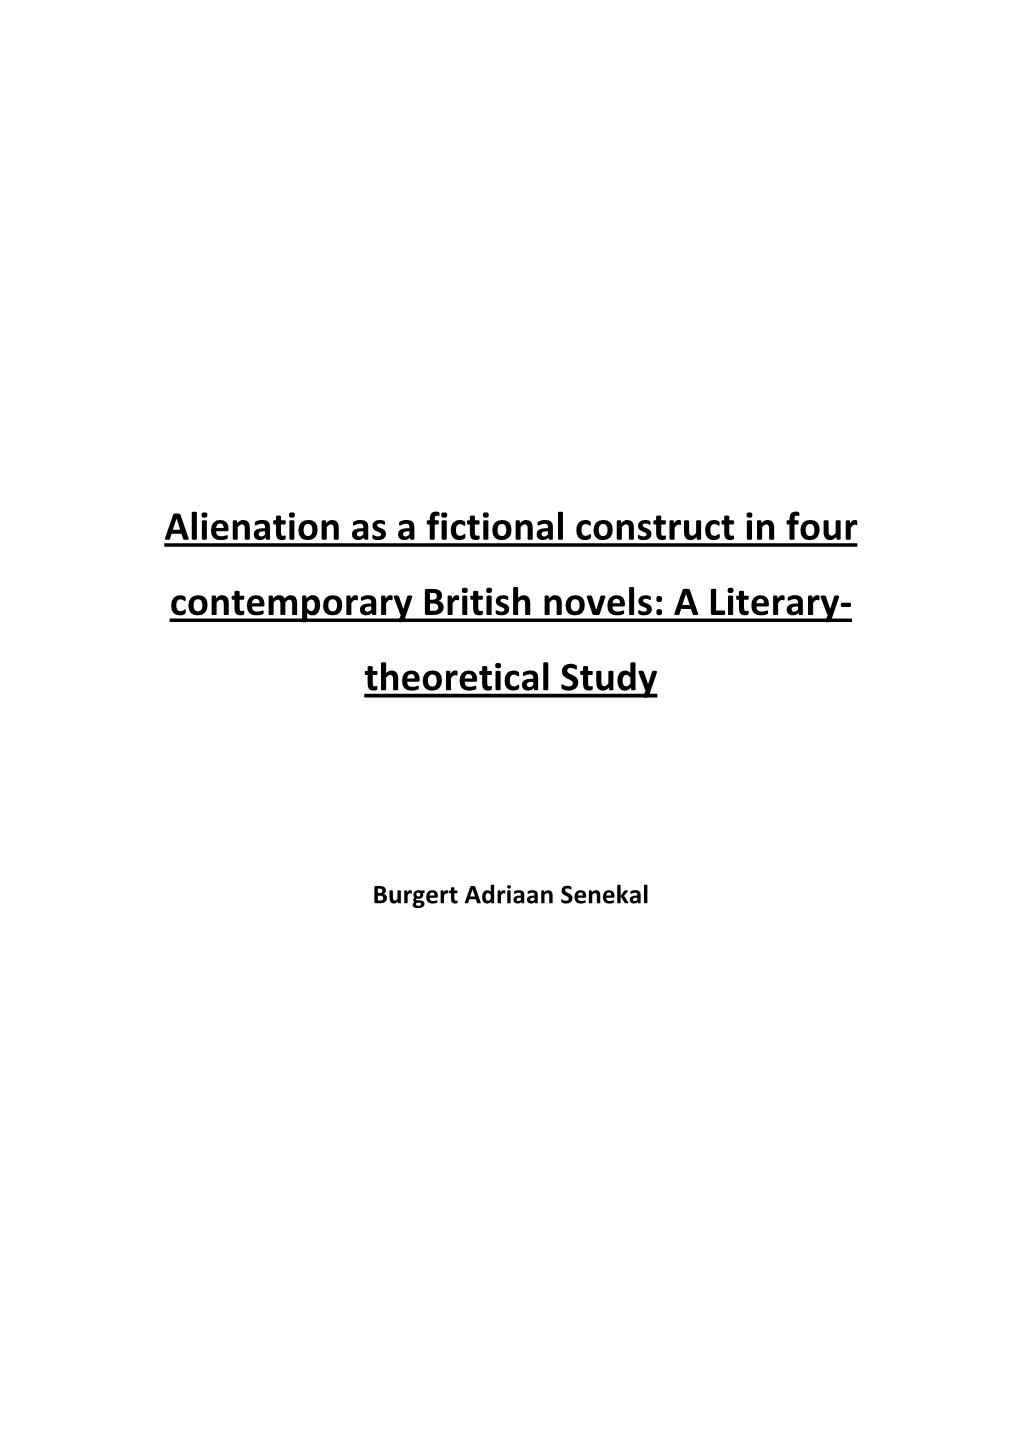 Alienation As a Fictional Construct in Four Contemporary British Novels: a Literary- Theoretical Study